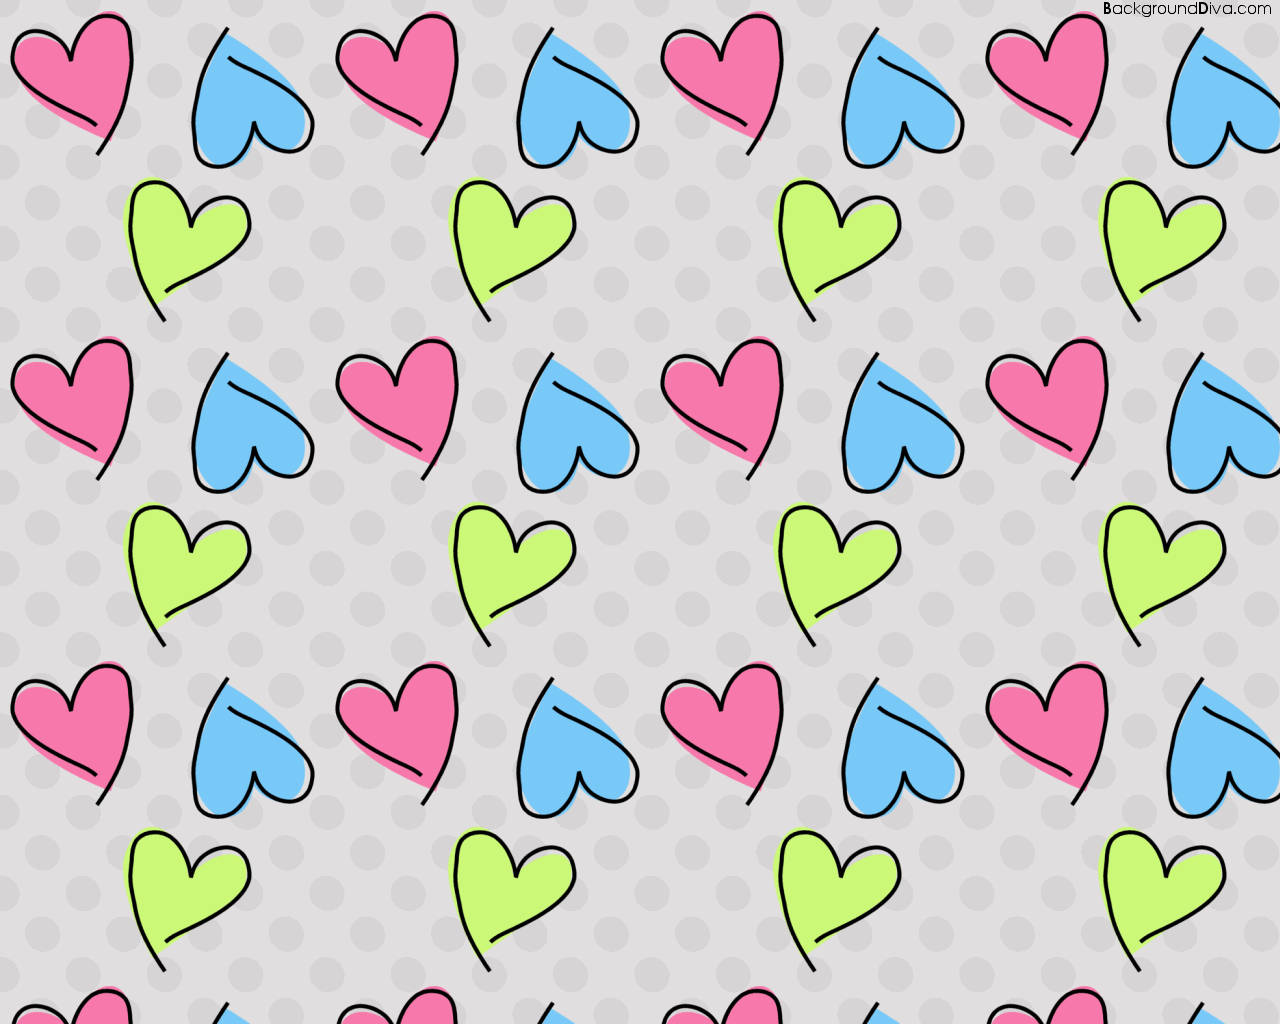 Spreading the love with girly heart scribbles Wallpaper